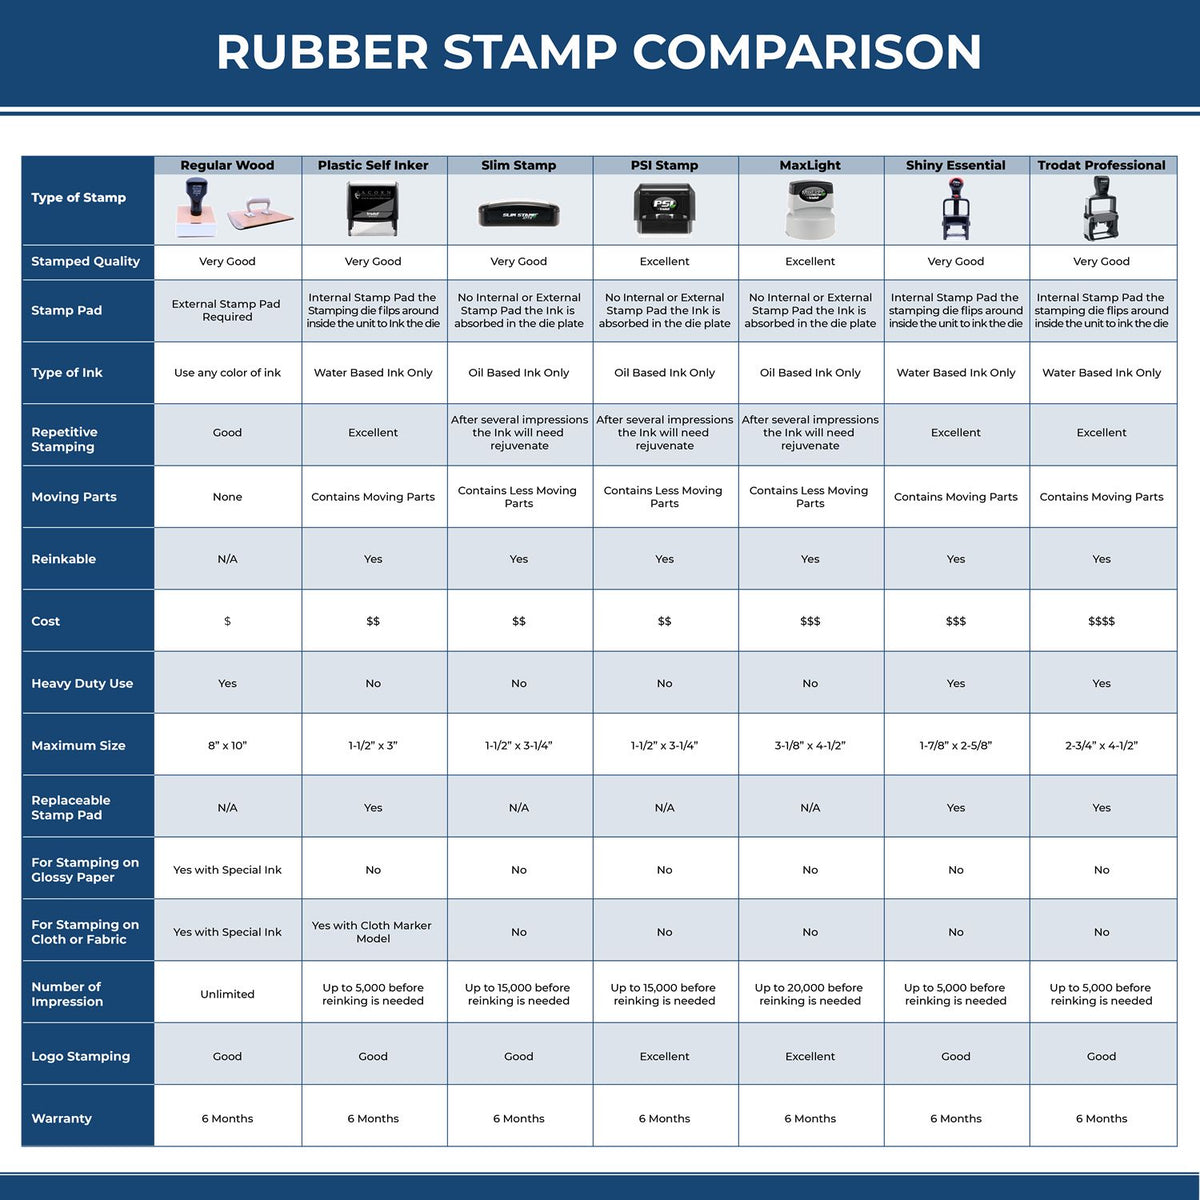 Self-Inking Asymptomatic Stamp 4472S Rubber Stamp Comparison